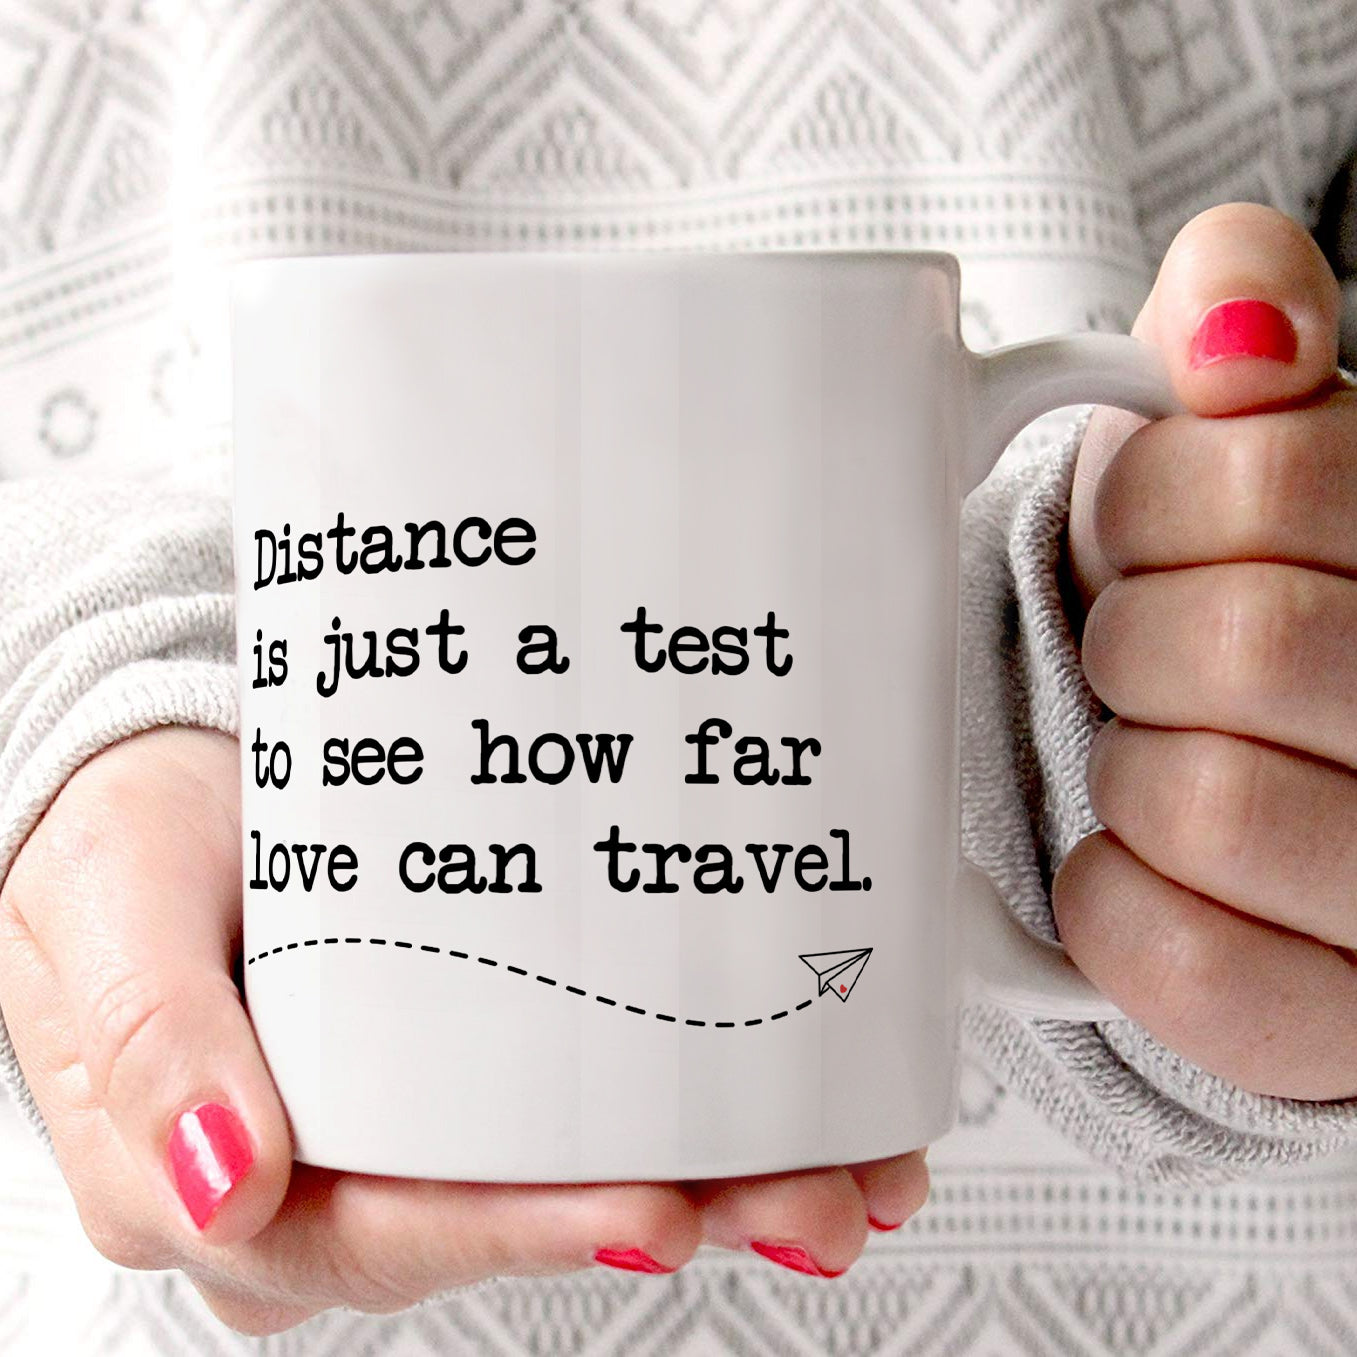 Trend Setters Original (State to State Long Distance - Personalized) 11 oz White Ceramic Mug